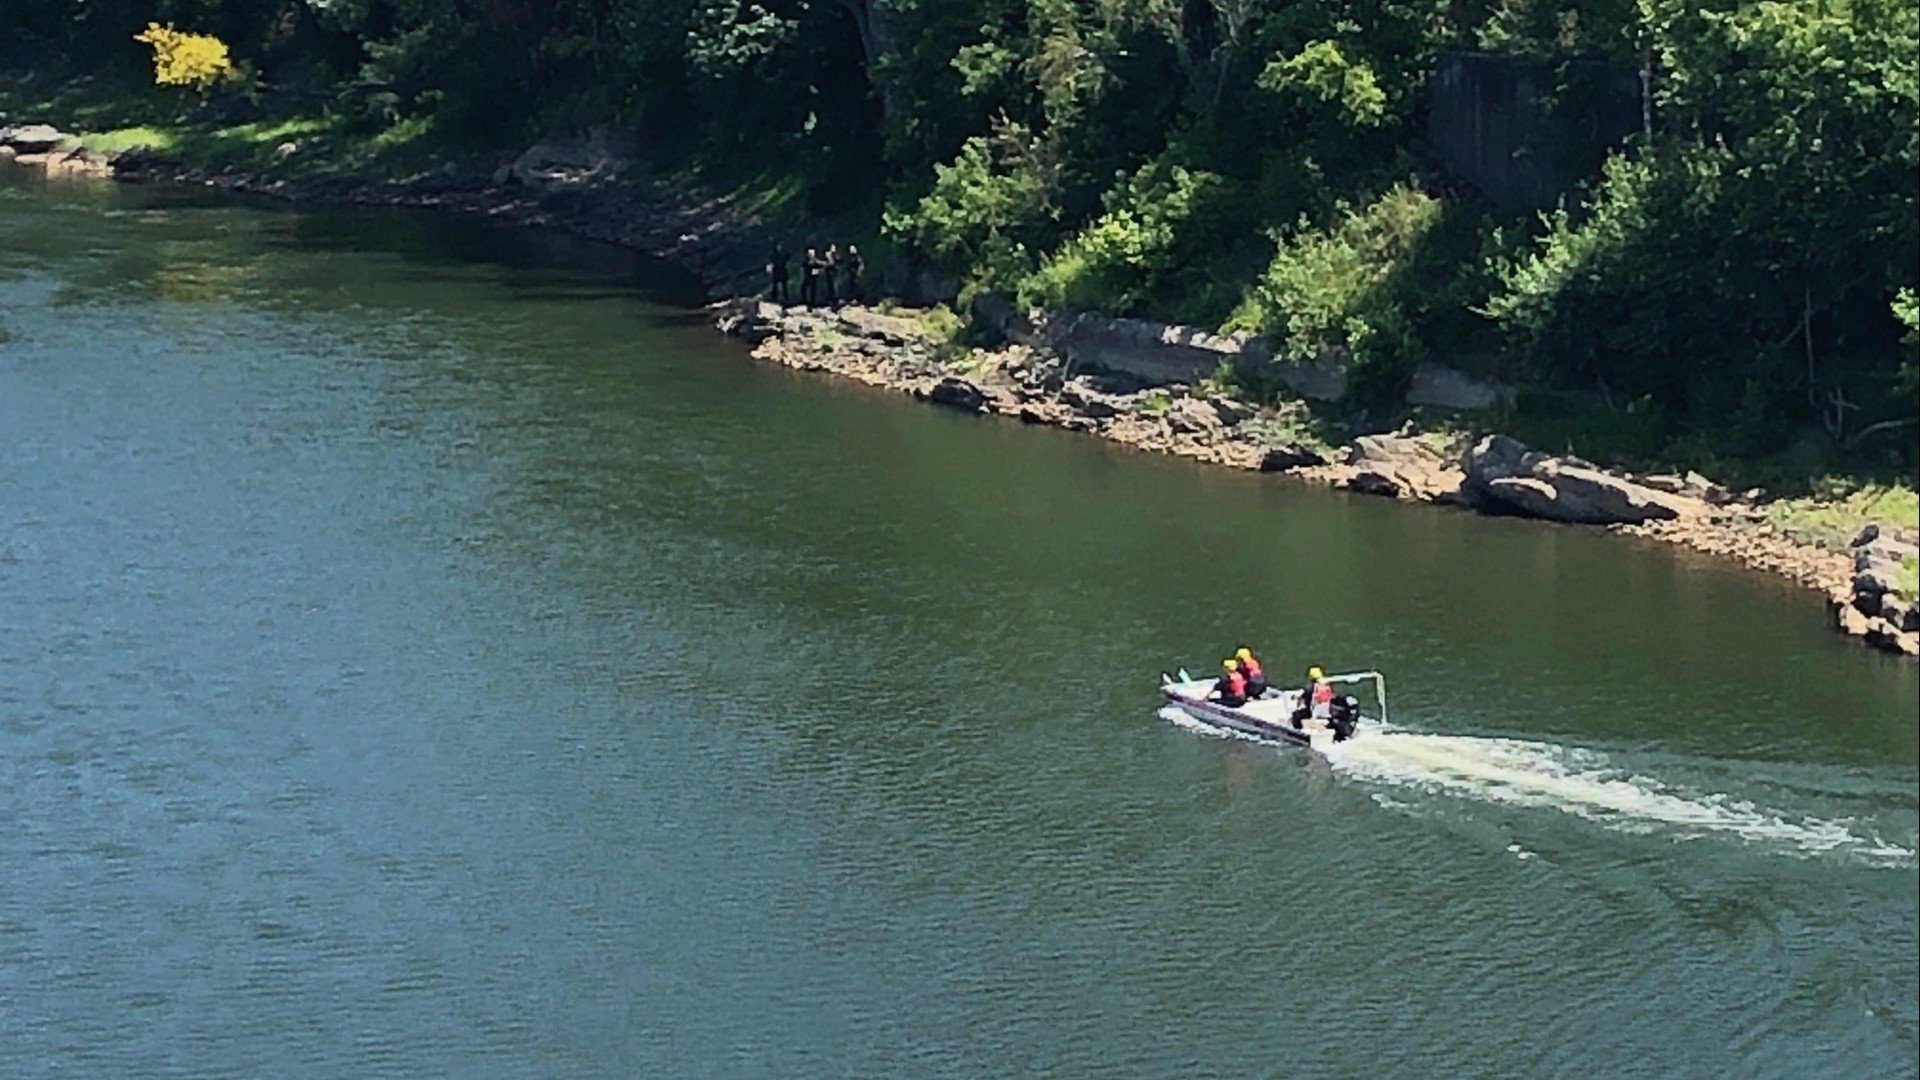 Emergency crews responded to the Susquehanna River in Wilkes-Barre Wednesday afternoon for reports of someone in the water.